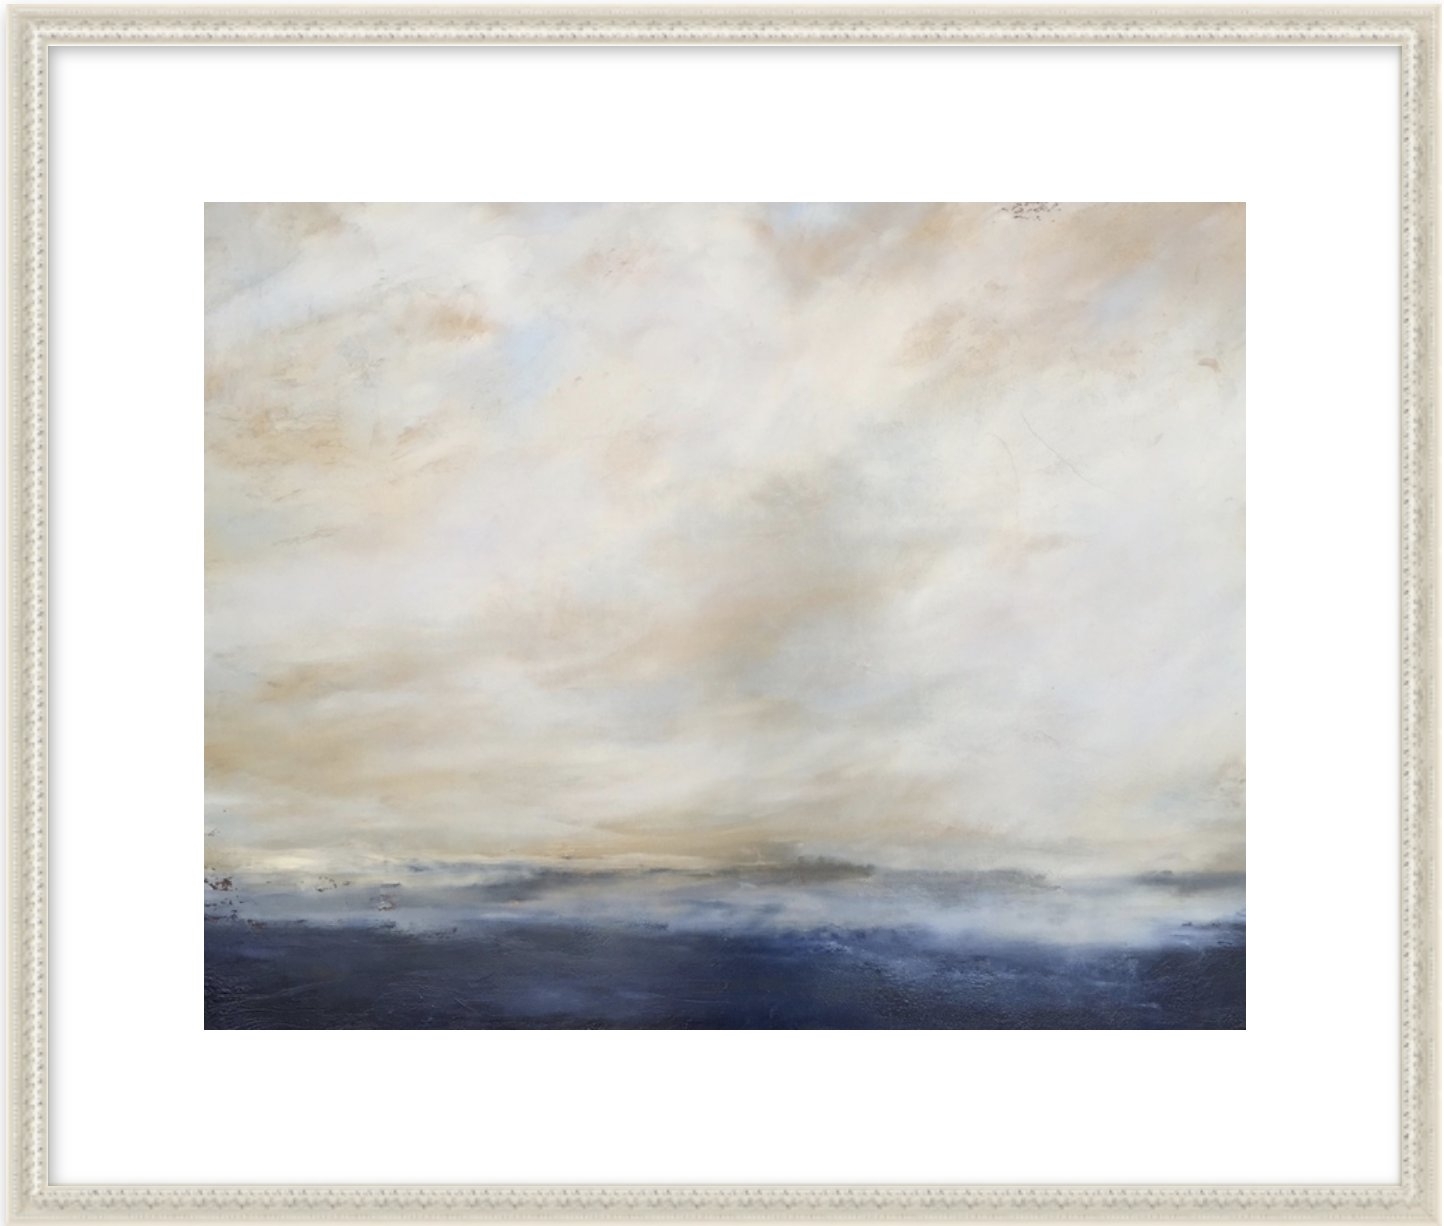 Oceans of Dreams by Faith Taylor for Artfully Walls - Image 0